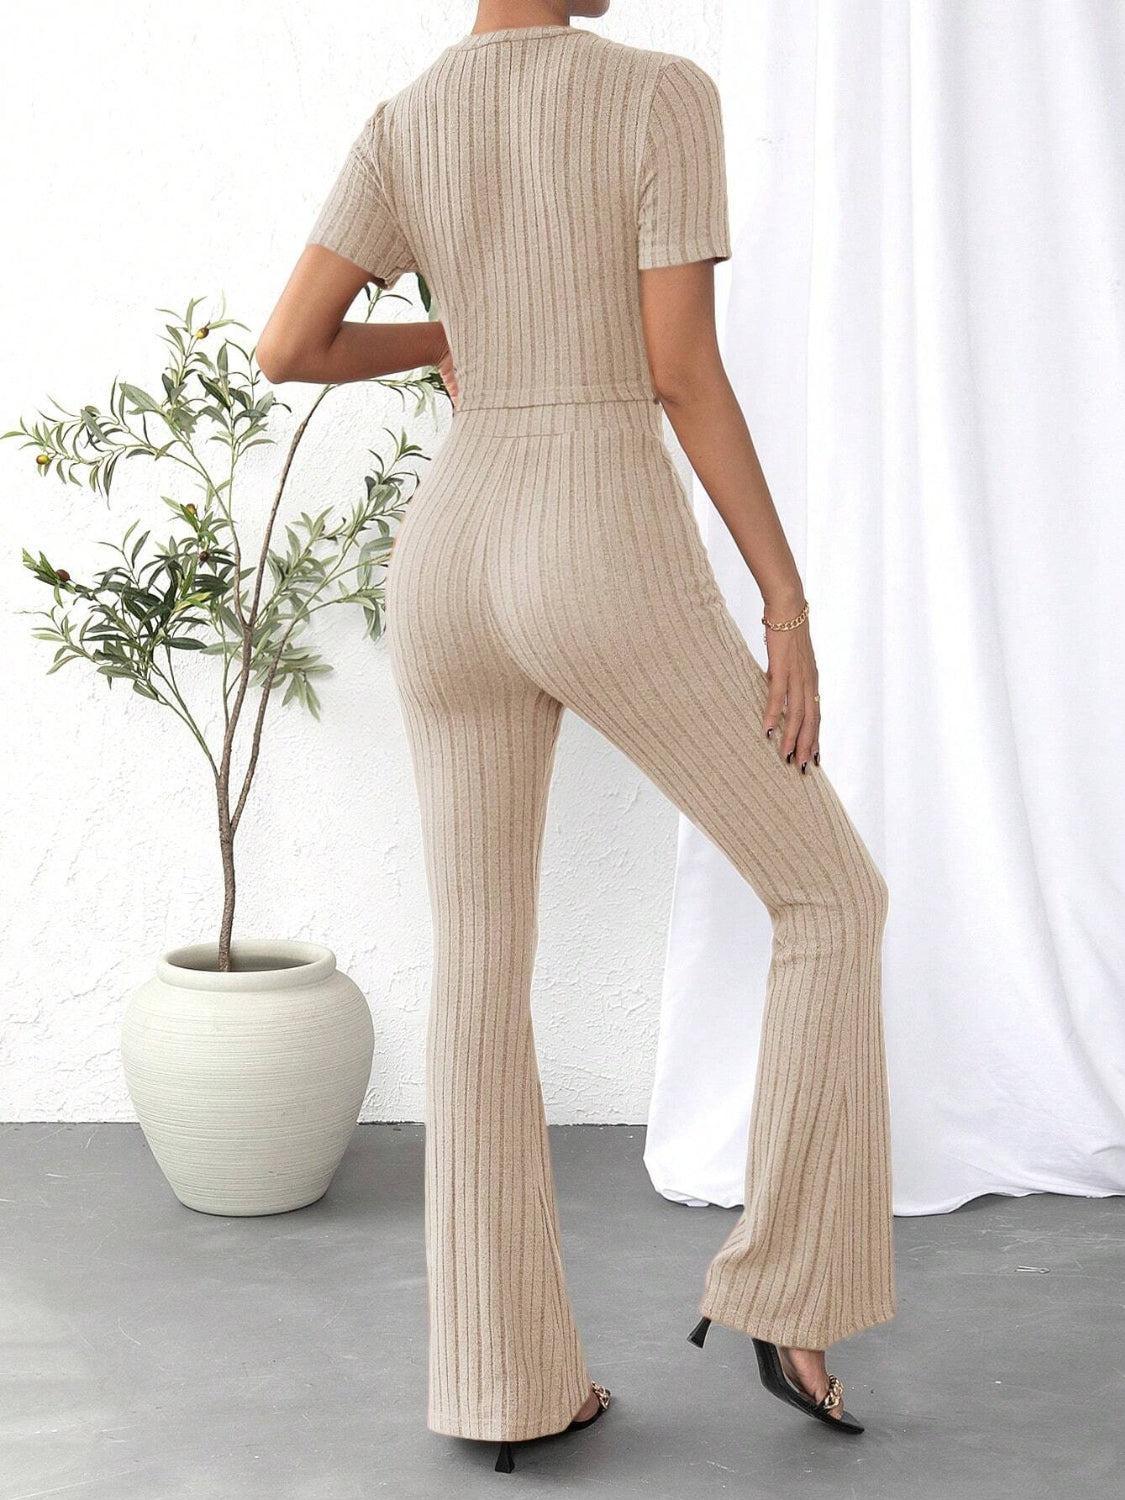 a woman wearing a beige jumpsuit and heels